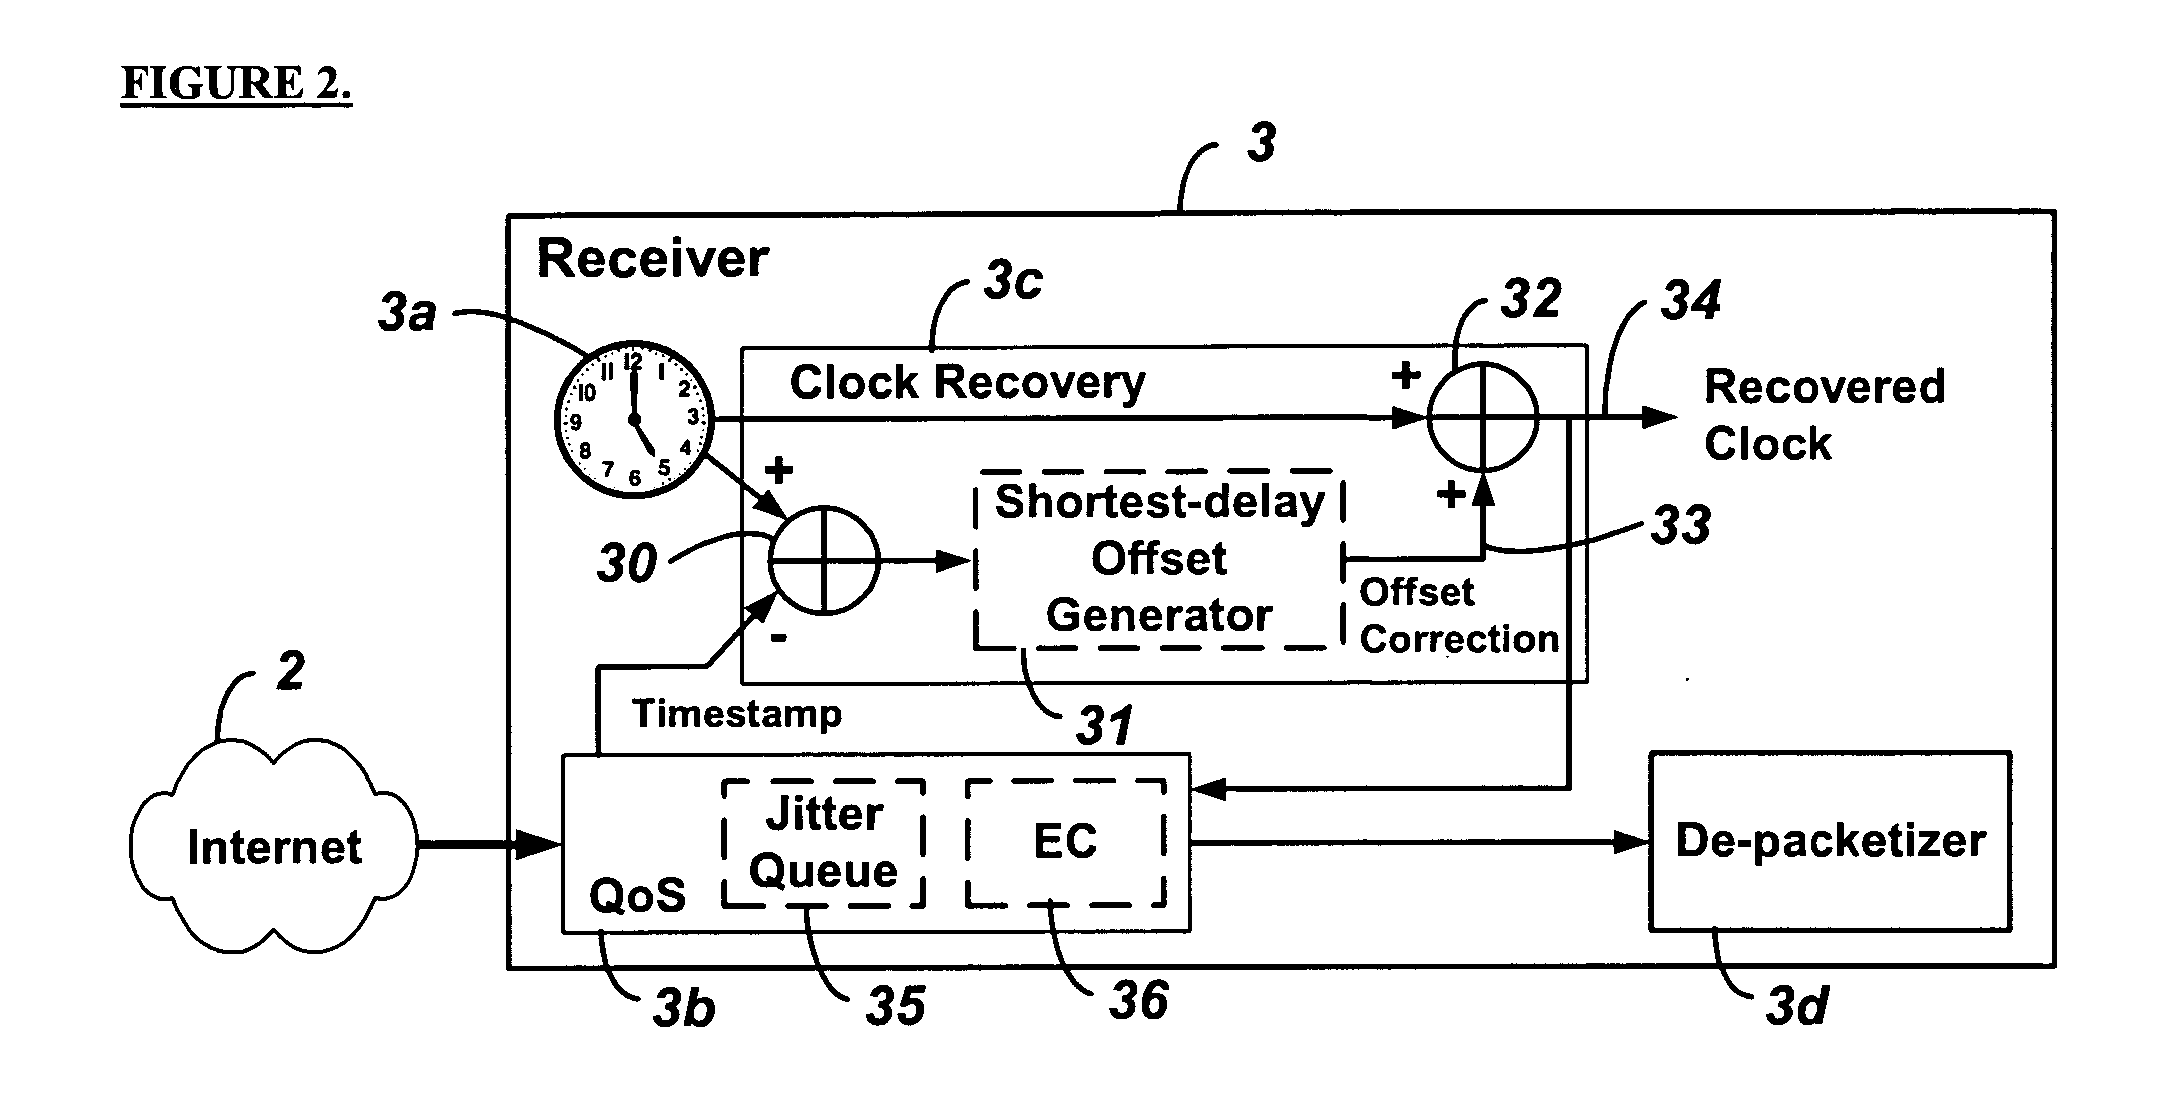 System and method for clock synchronization over packet-switched networks